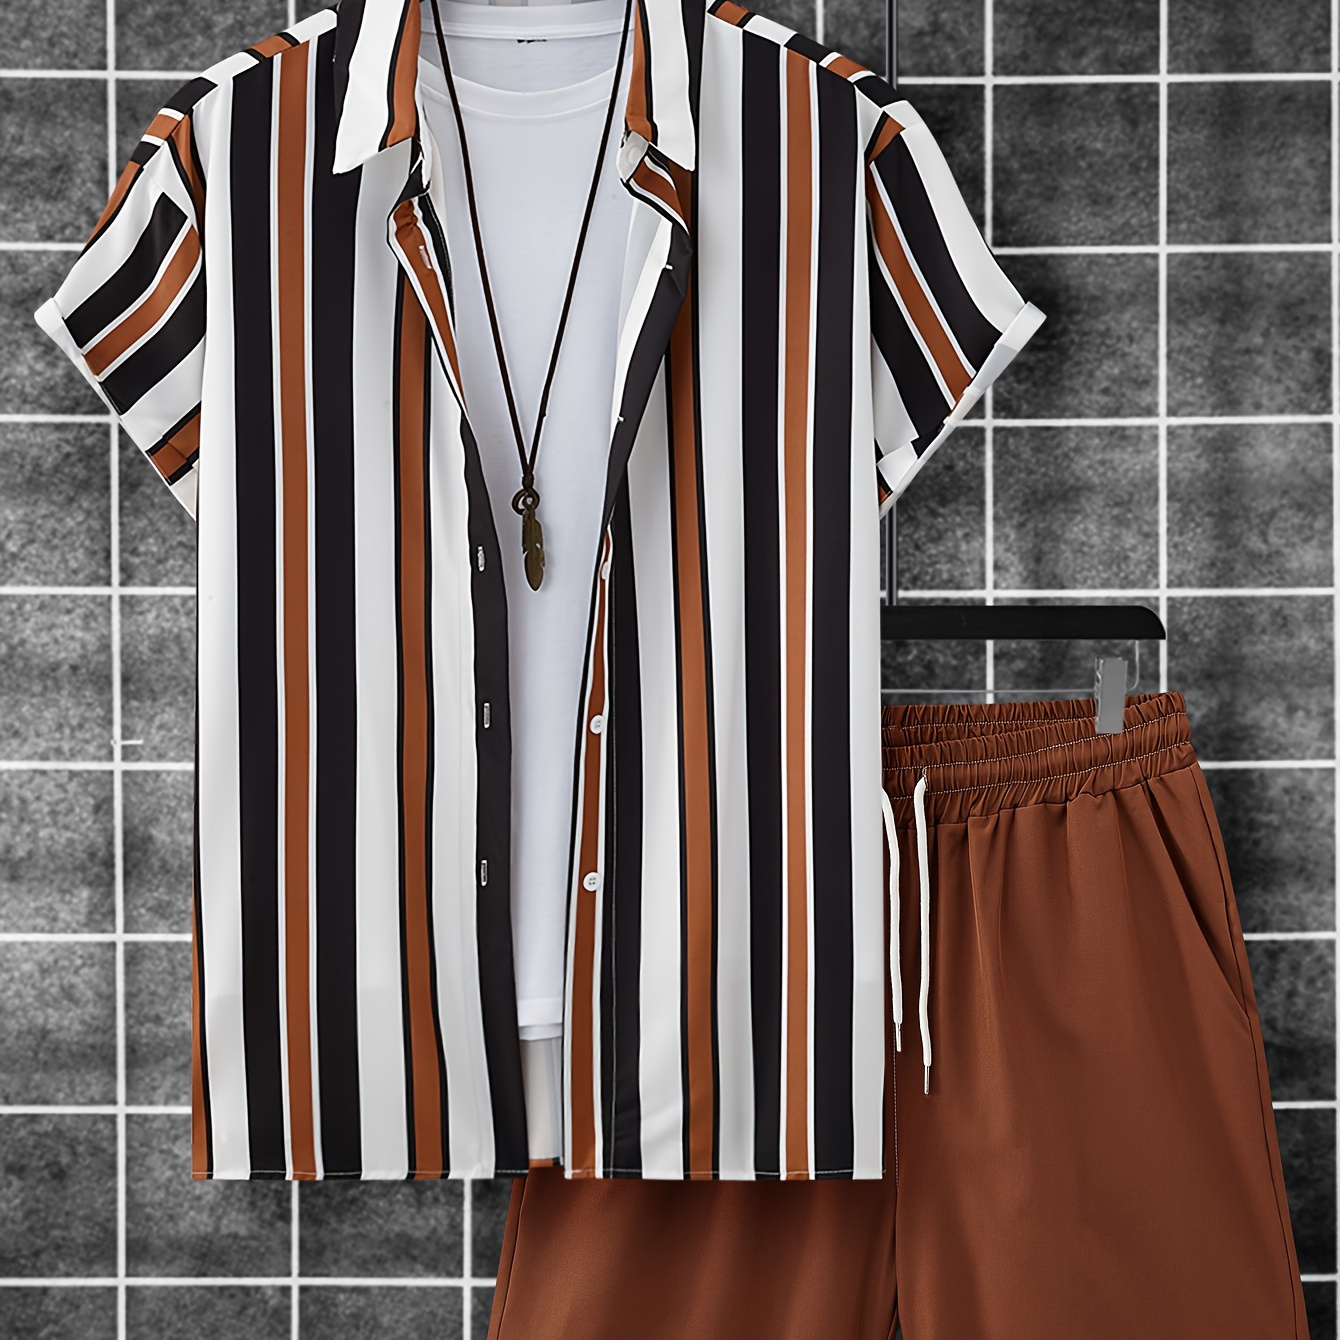 

Vertical Striped Pattern Print, Men's 2pcs Outfits, Casual Lapel Button Up Short Sleeve Shirts Shirt And Drawstring Shorts Set For Summer, Men's Clothing